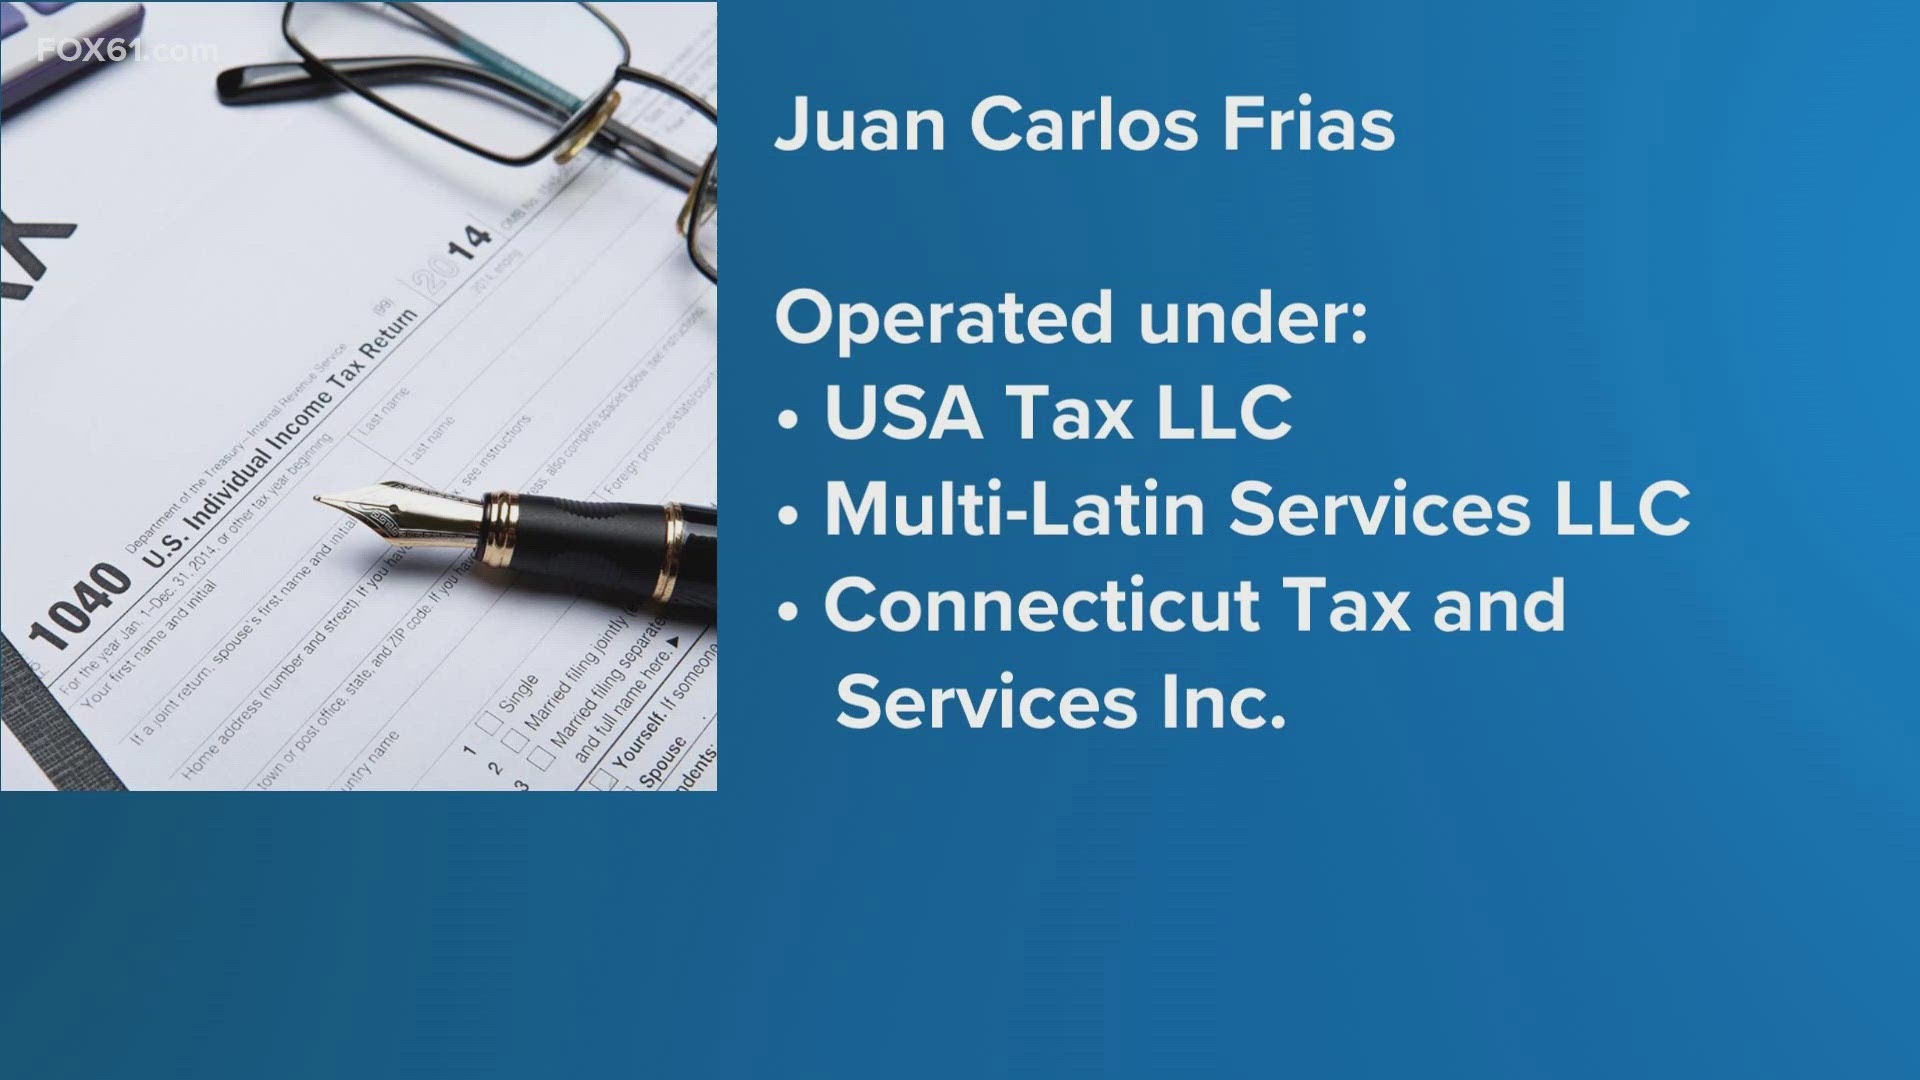 According to the DOJ, the three businesses belonging to Juan Carlos Frias prepared over 10,000 tax returns for customers between 2017-2021.